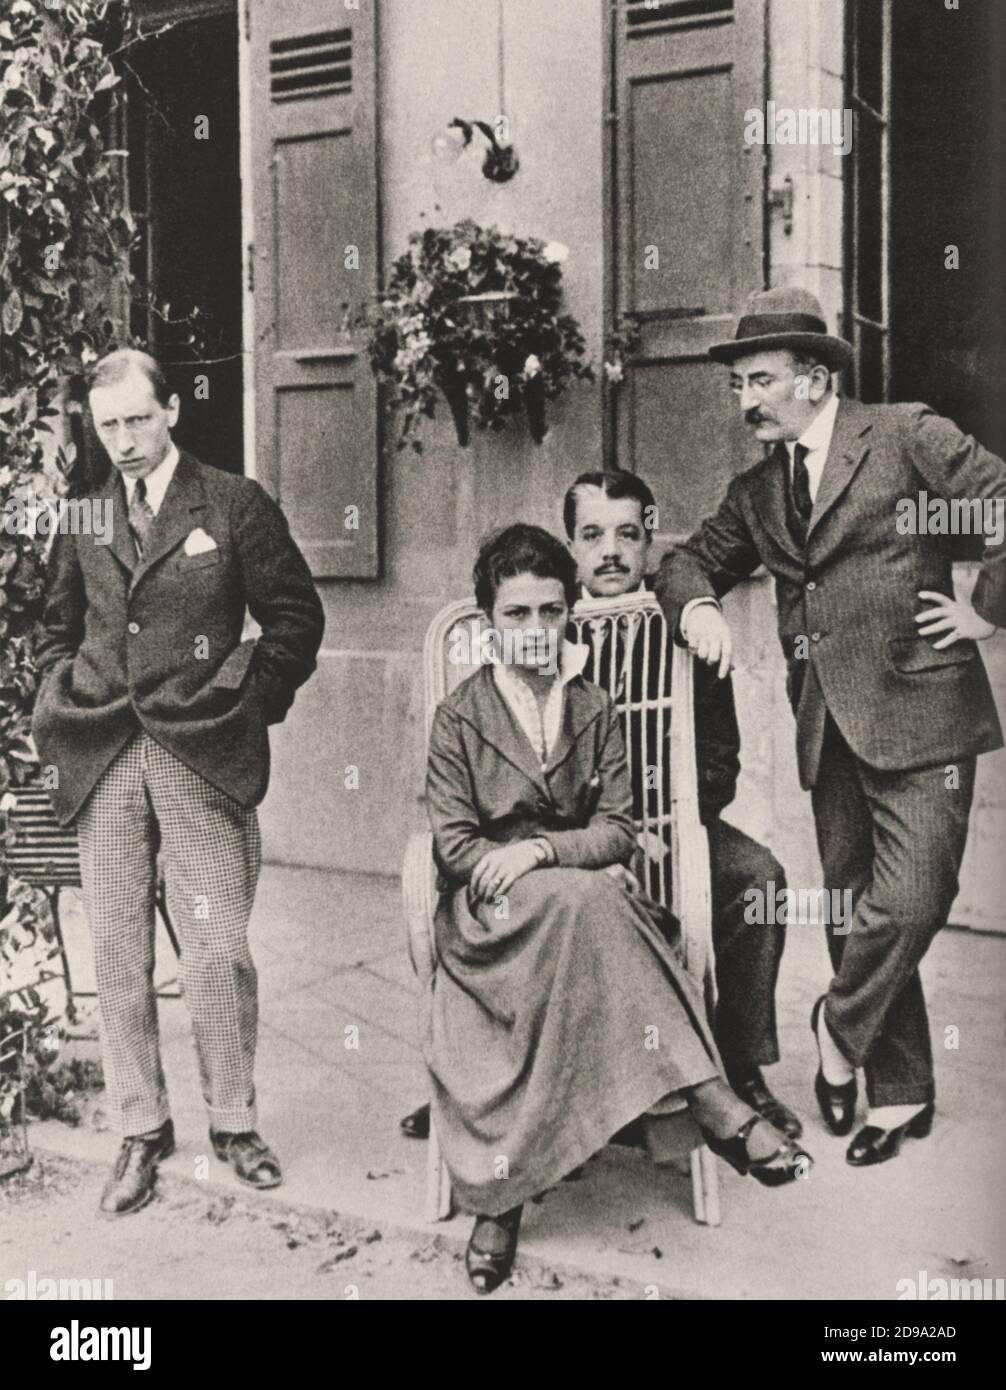 1915 , Lausanne , Switzerland : The russian music composer IGOR STRAVINSKY ( 1882 - 1971 ) with RUZHENA KHVOSHCHINSKAIA ( the wife of russian attache' at Russian Embassy in Rome , Italy), SERGEI DIAGHILEV and the painter artist LEON BAKST  . Expecially celebrated for his daring ballets of early 1910's FIREBIRD ( L'uccello di fuoco ), PETROUCHKA ( Petruska ) and THE RITE OF SPRINGS ( La saga della primavera ) , he composed a great variety of innovative works that made him one of the chief trend setters of the 20th century - BALLETS RUSSES  - Diagilev - Diagjlev - COMPOSITORE - OPERA LIRICA - CL Stock Photo